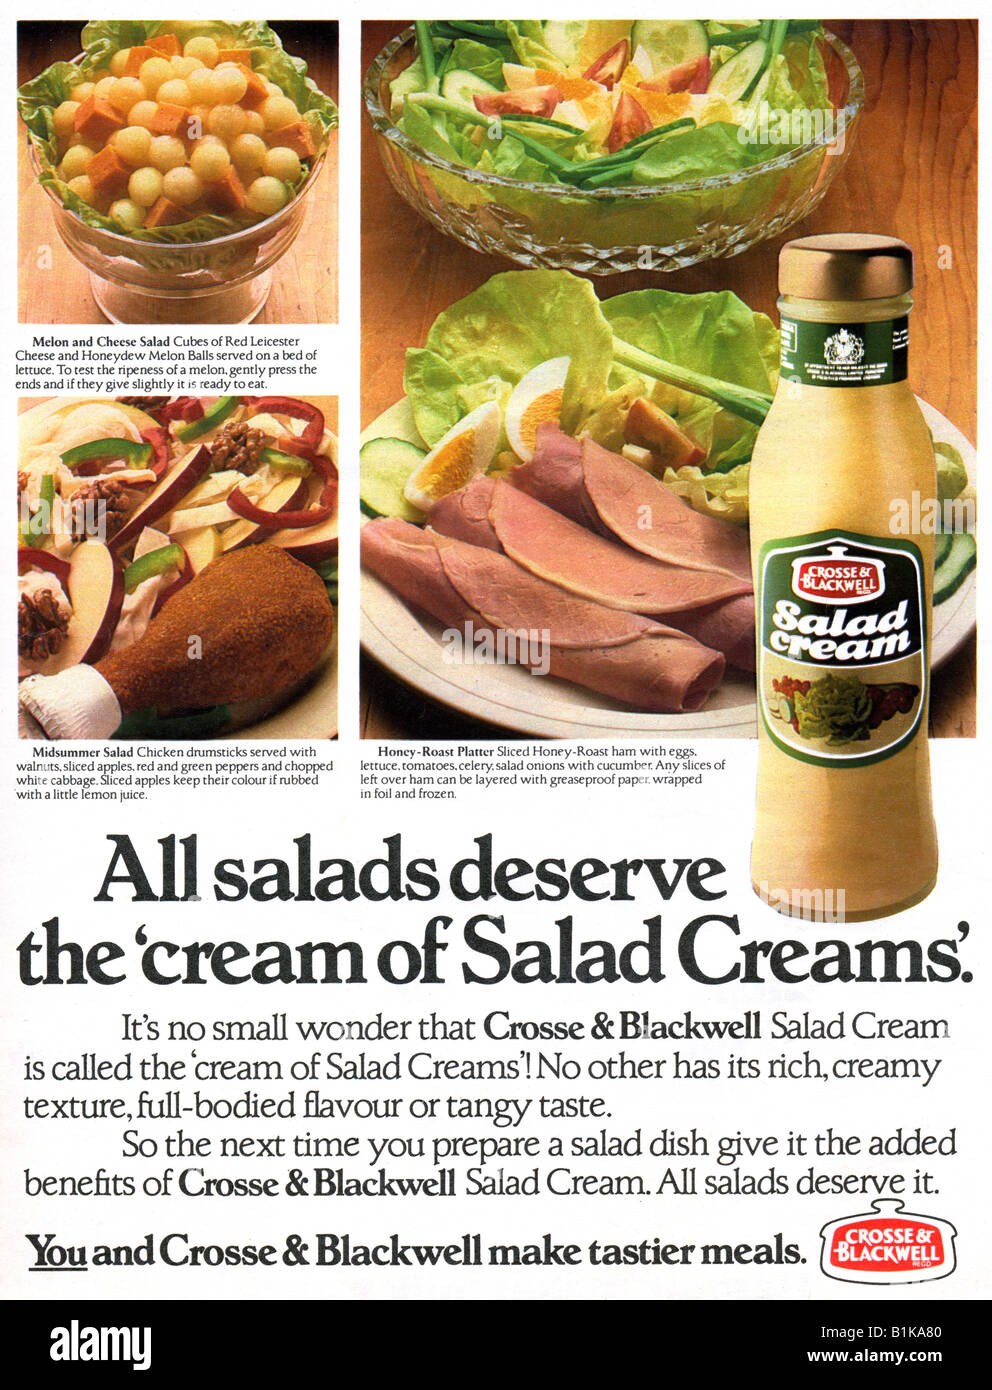 1980 advertisement for Crosse & Blackwell Salad Cream FOR EDITORIAL USE ONLY Stock Photo